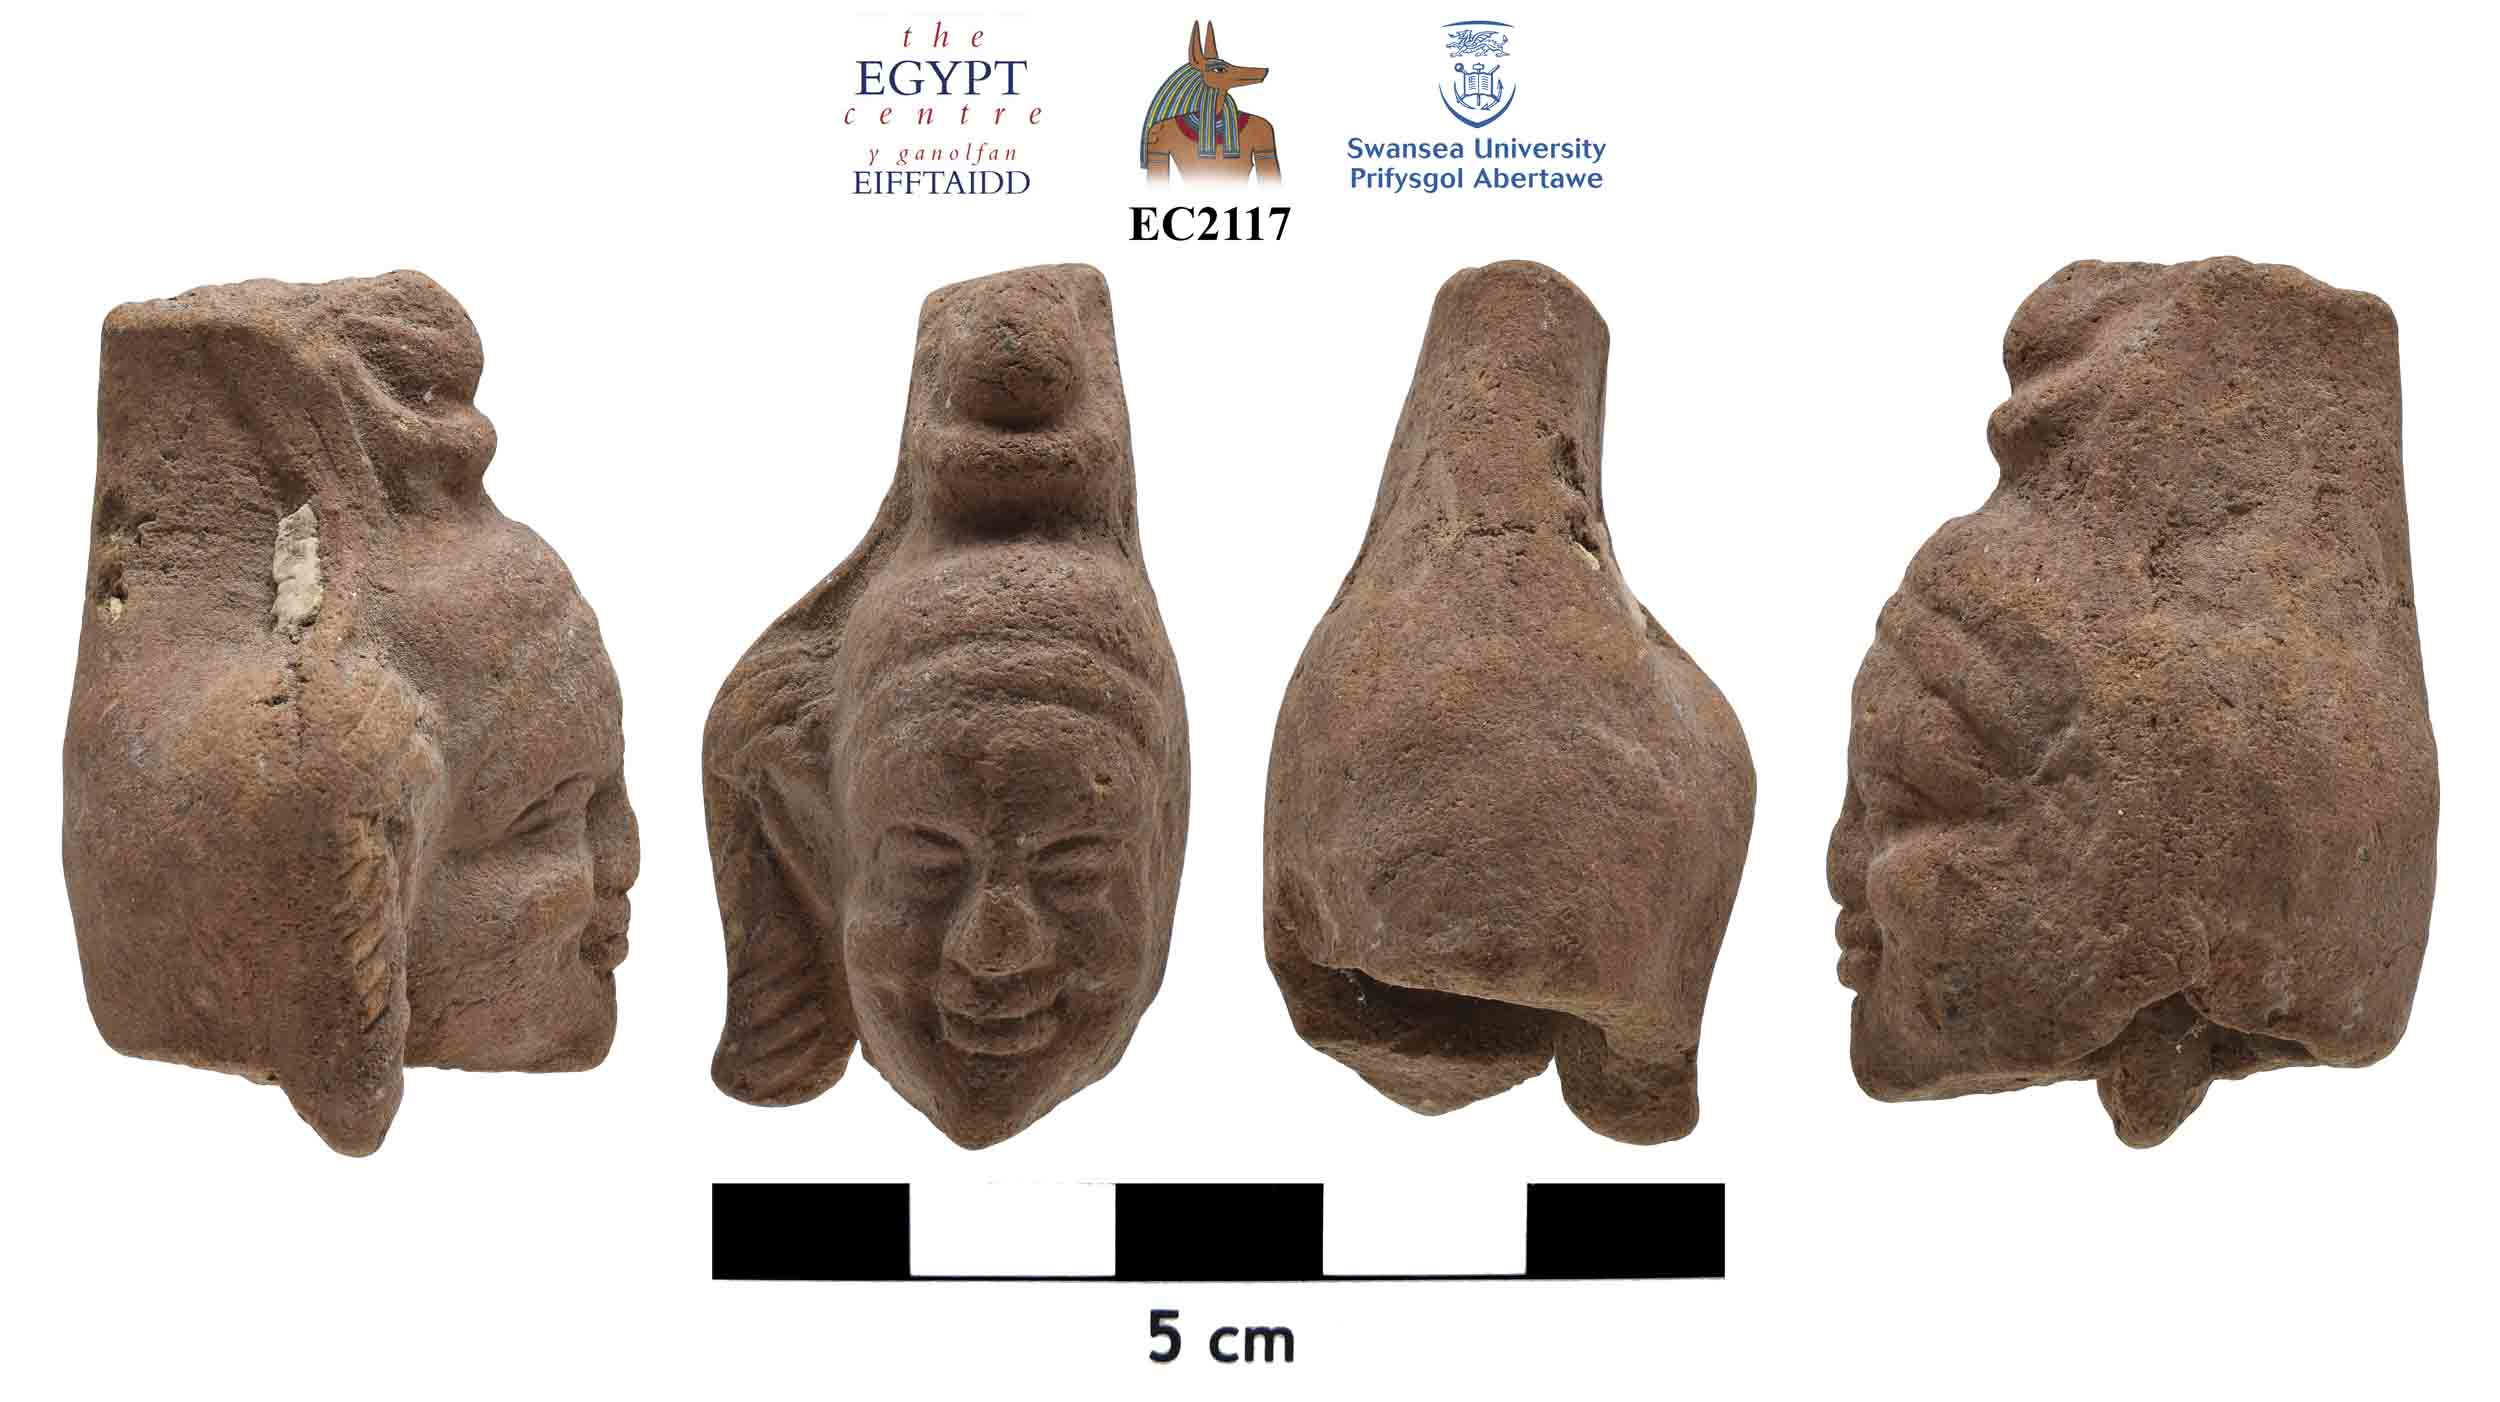 Image for: Head of a terracotta figure